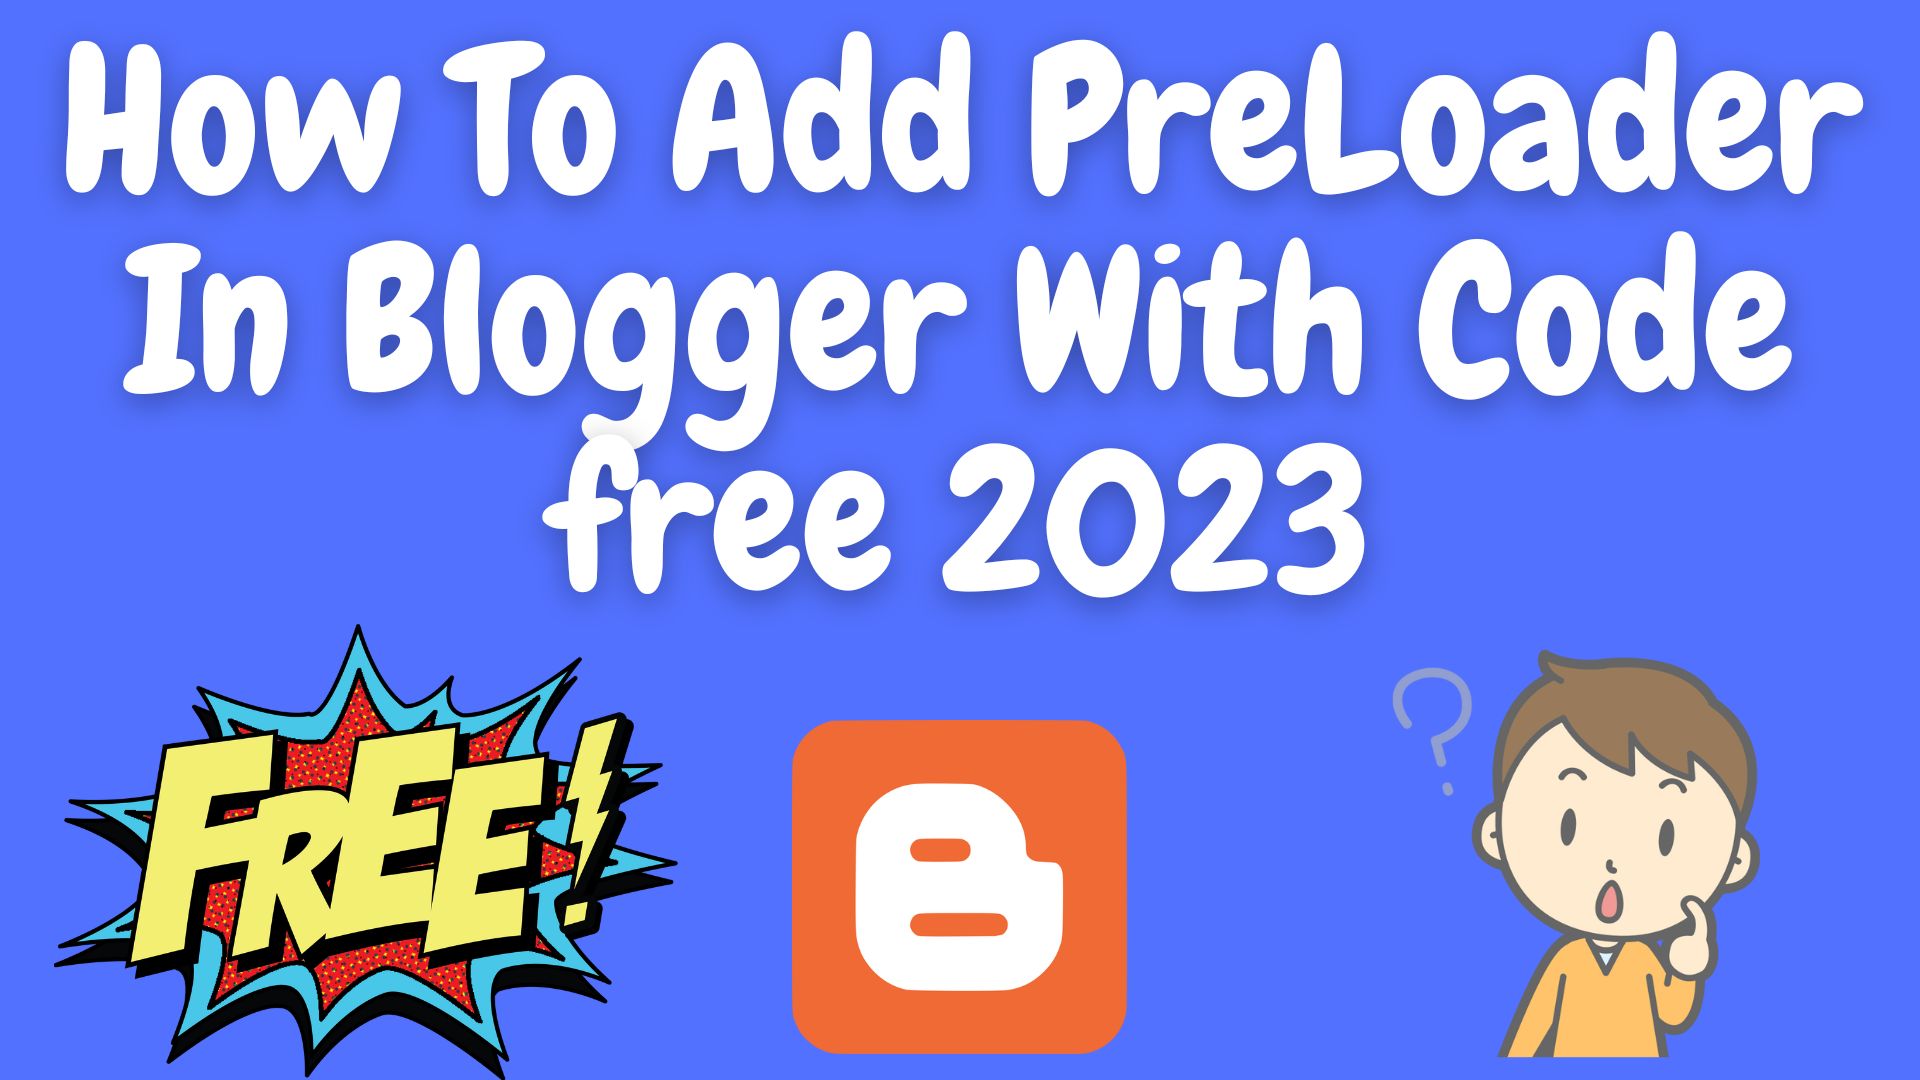 How To Add Preloader In Blogger With Code Free 2023